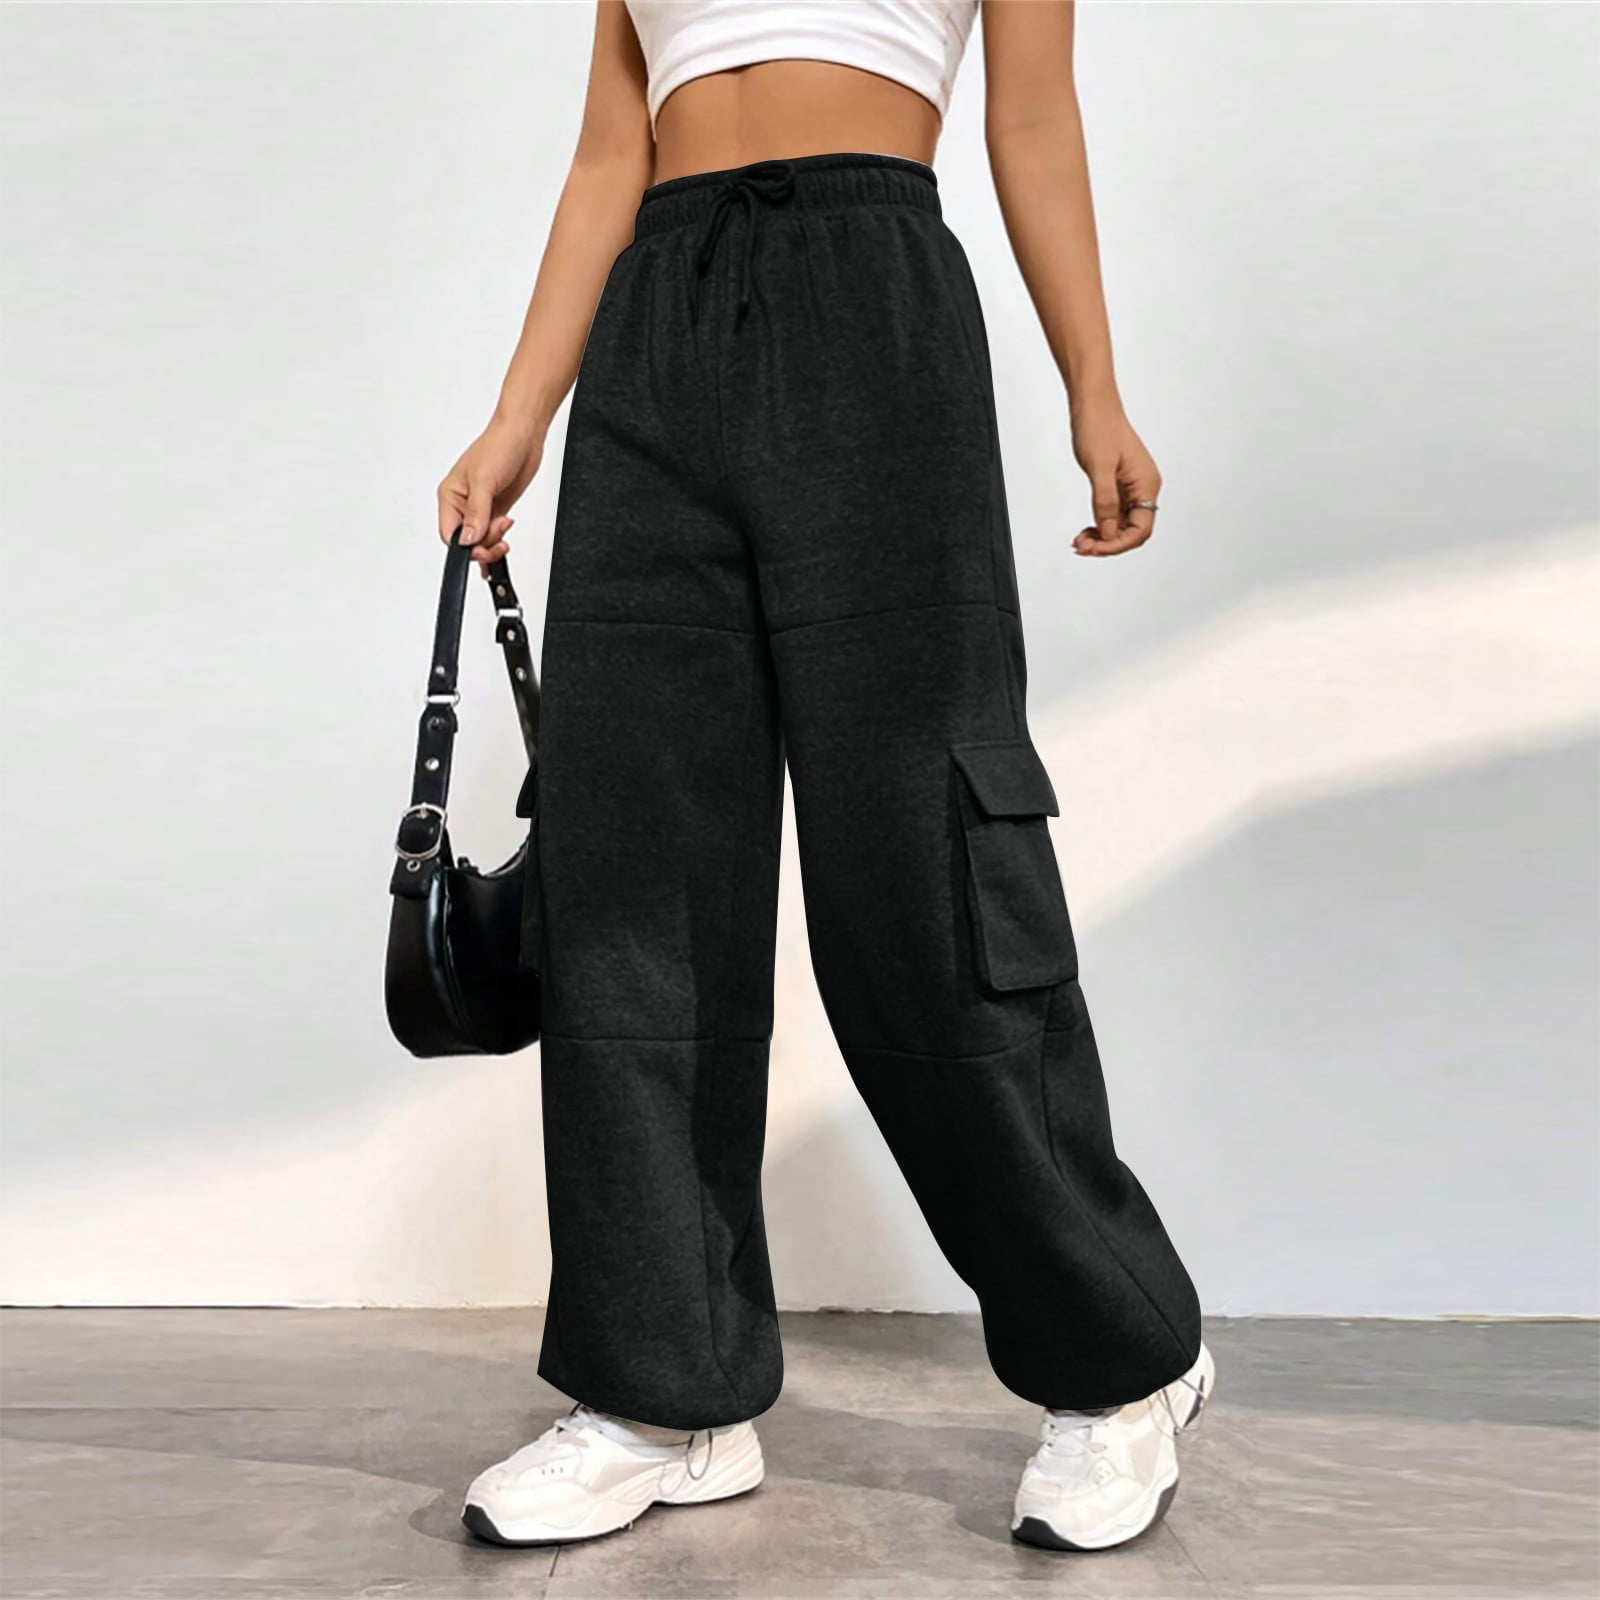 Susanny Cinched Sweatpants for Women Drawstring Elastic Waist Straight Leg  High Waisted with Pockets Sweatpants Joggers Athletic Cargo Baggy Pants  Running Cute Jogger Pants Black XL 